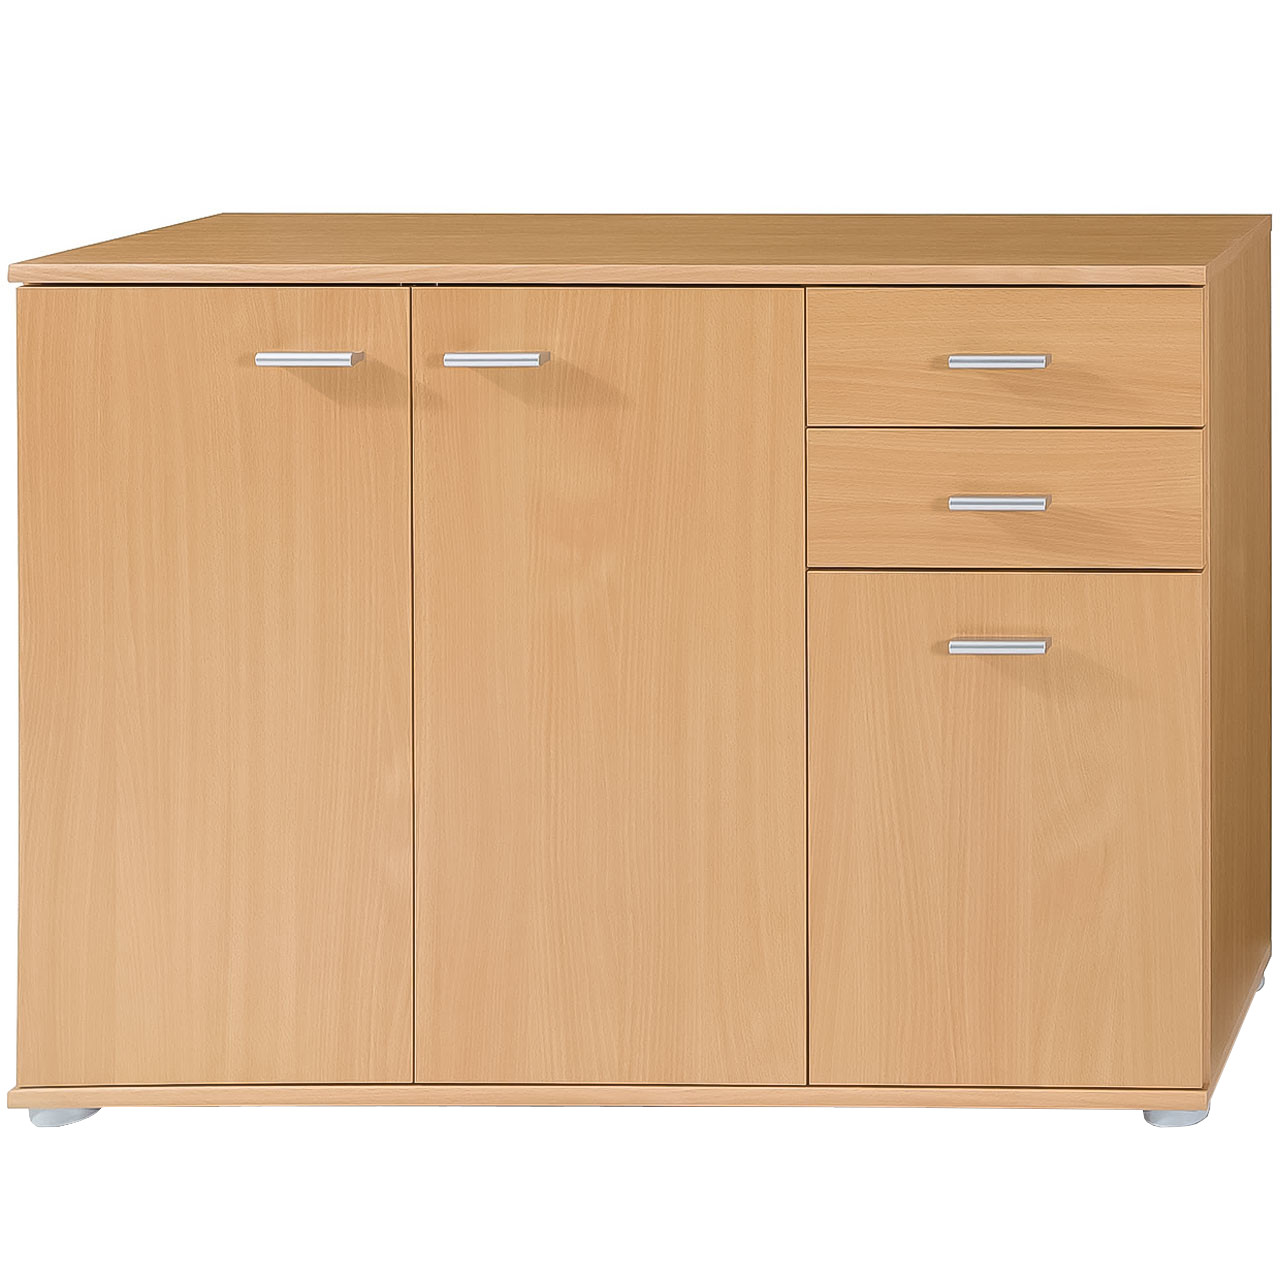 Storage cabinet MIKE 1 beech